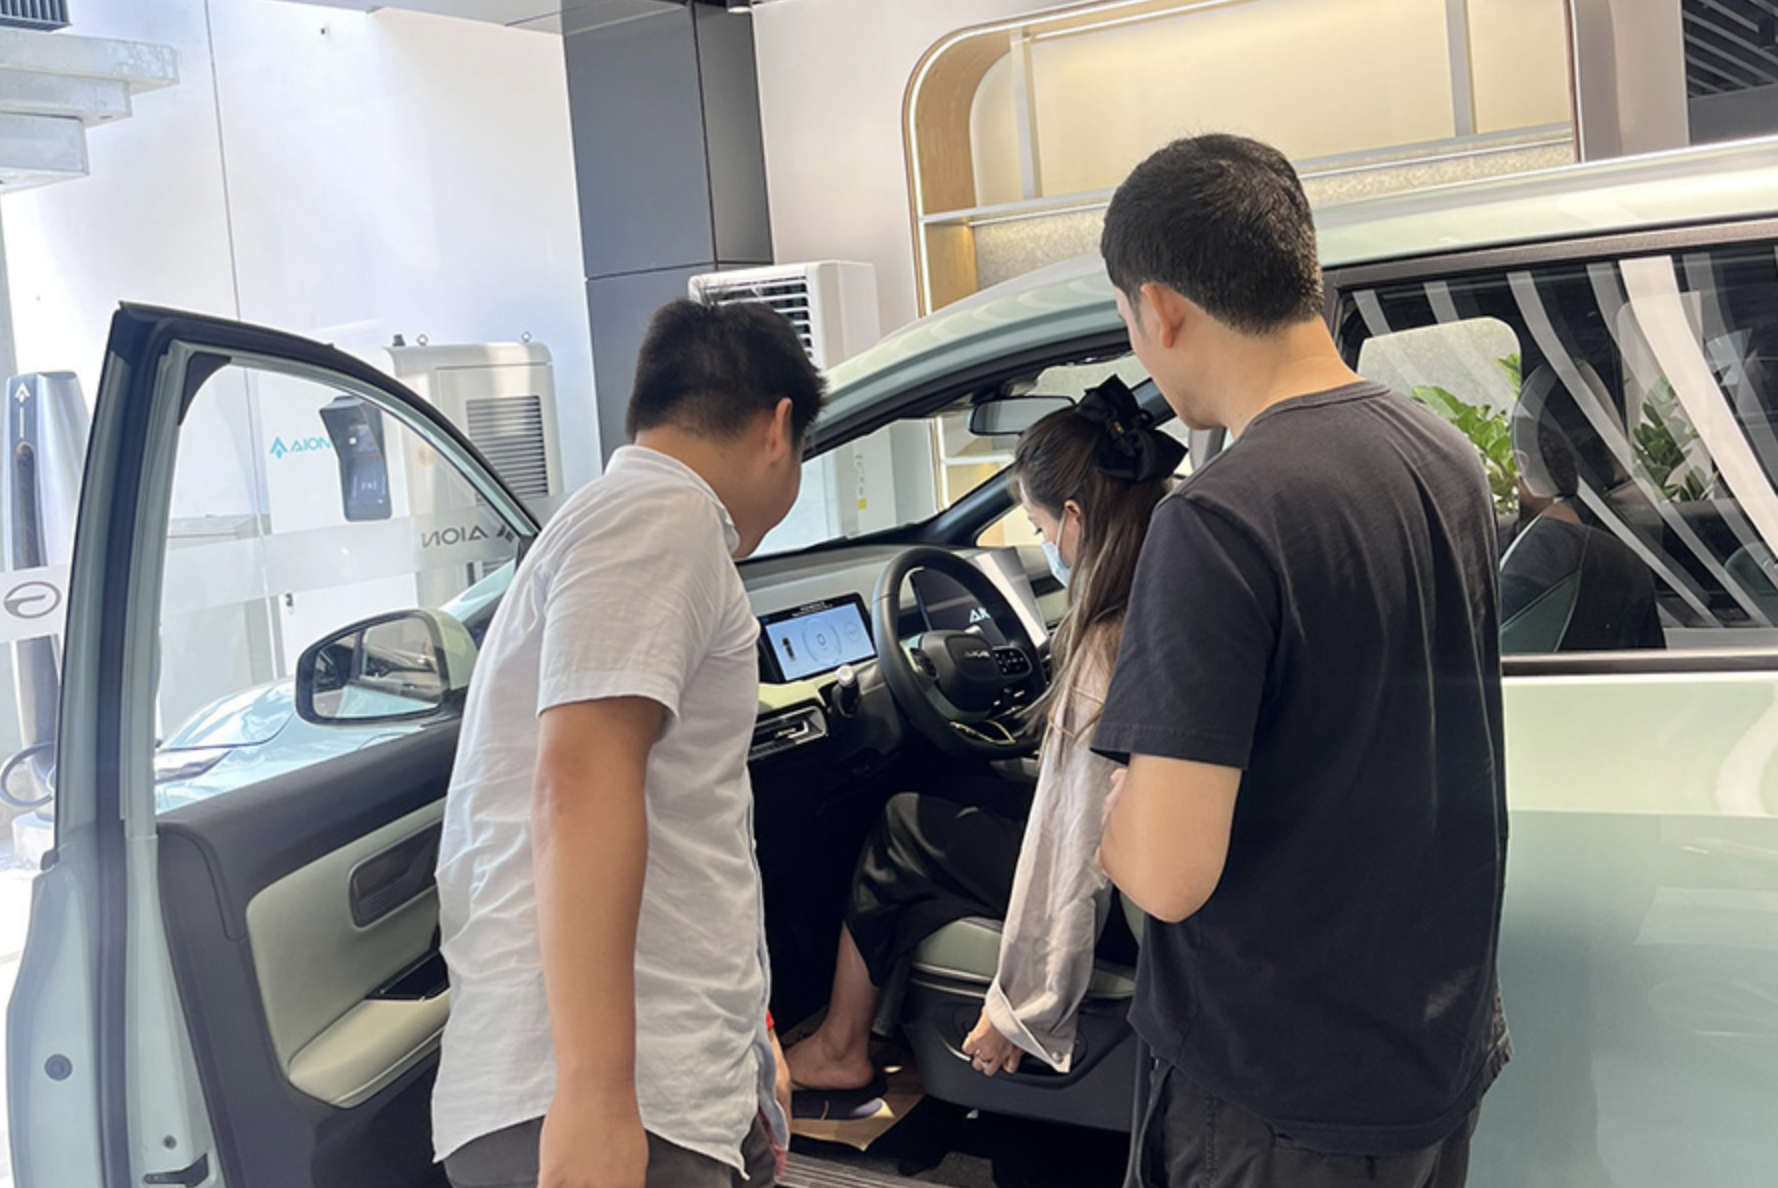 Customers take a look at an Aion car on display at a showroom in Ho Chi Minh City. Photo: AION Vietnam